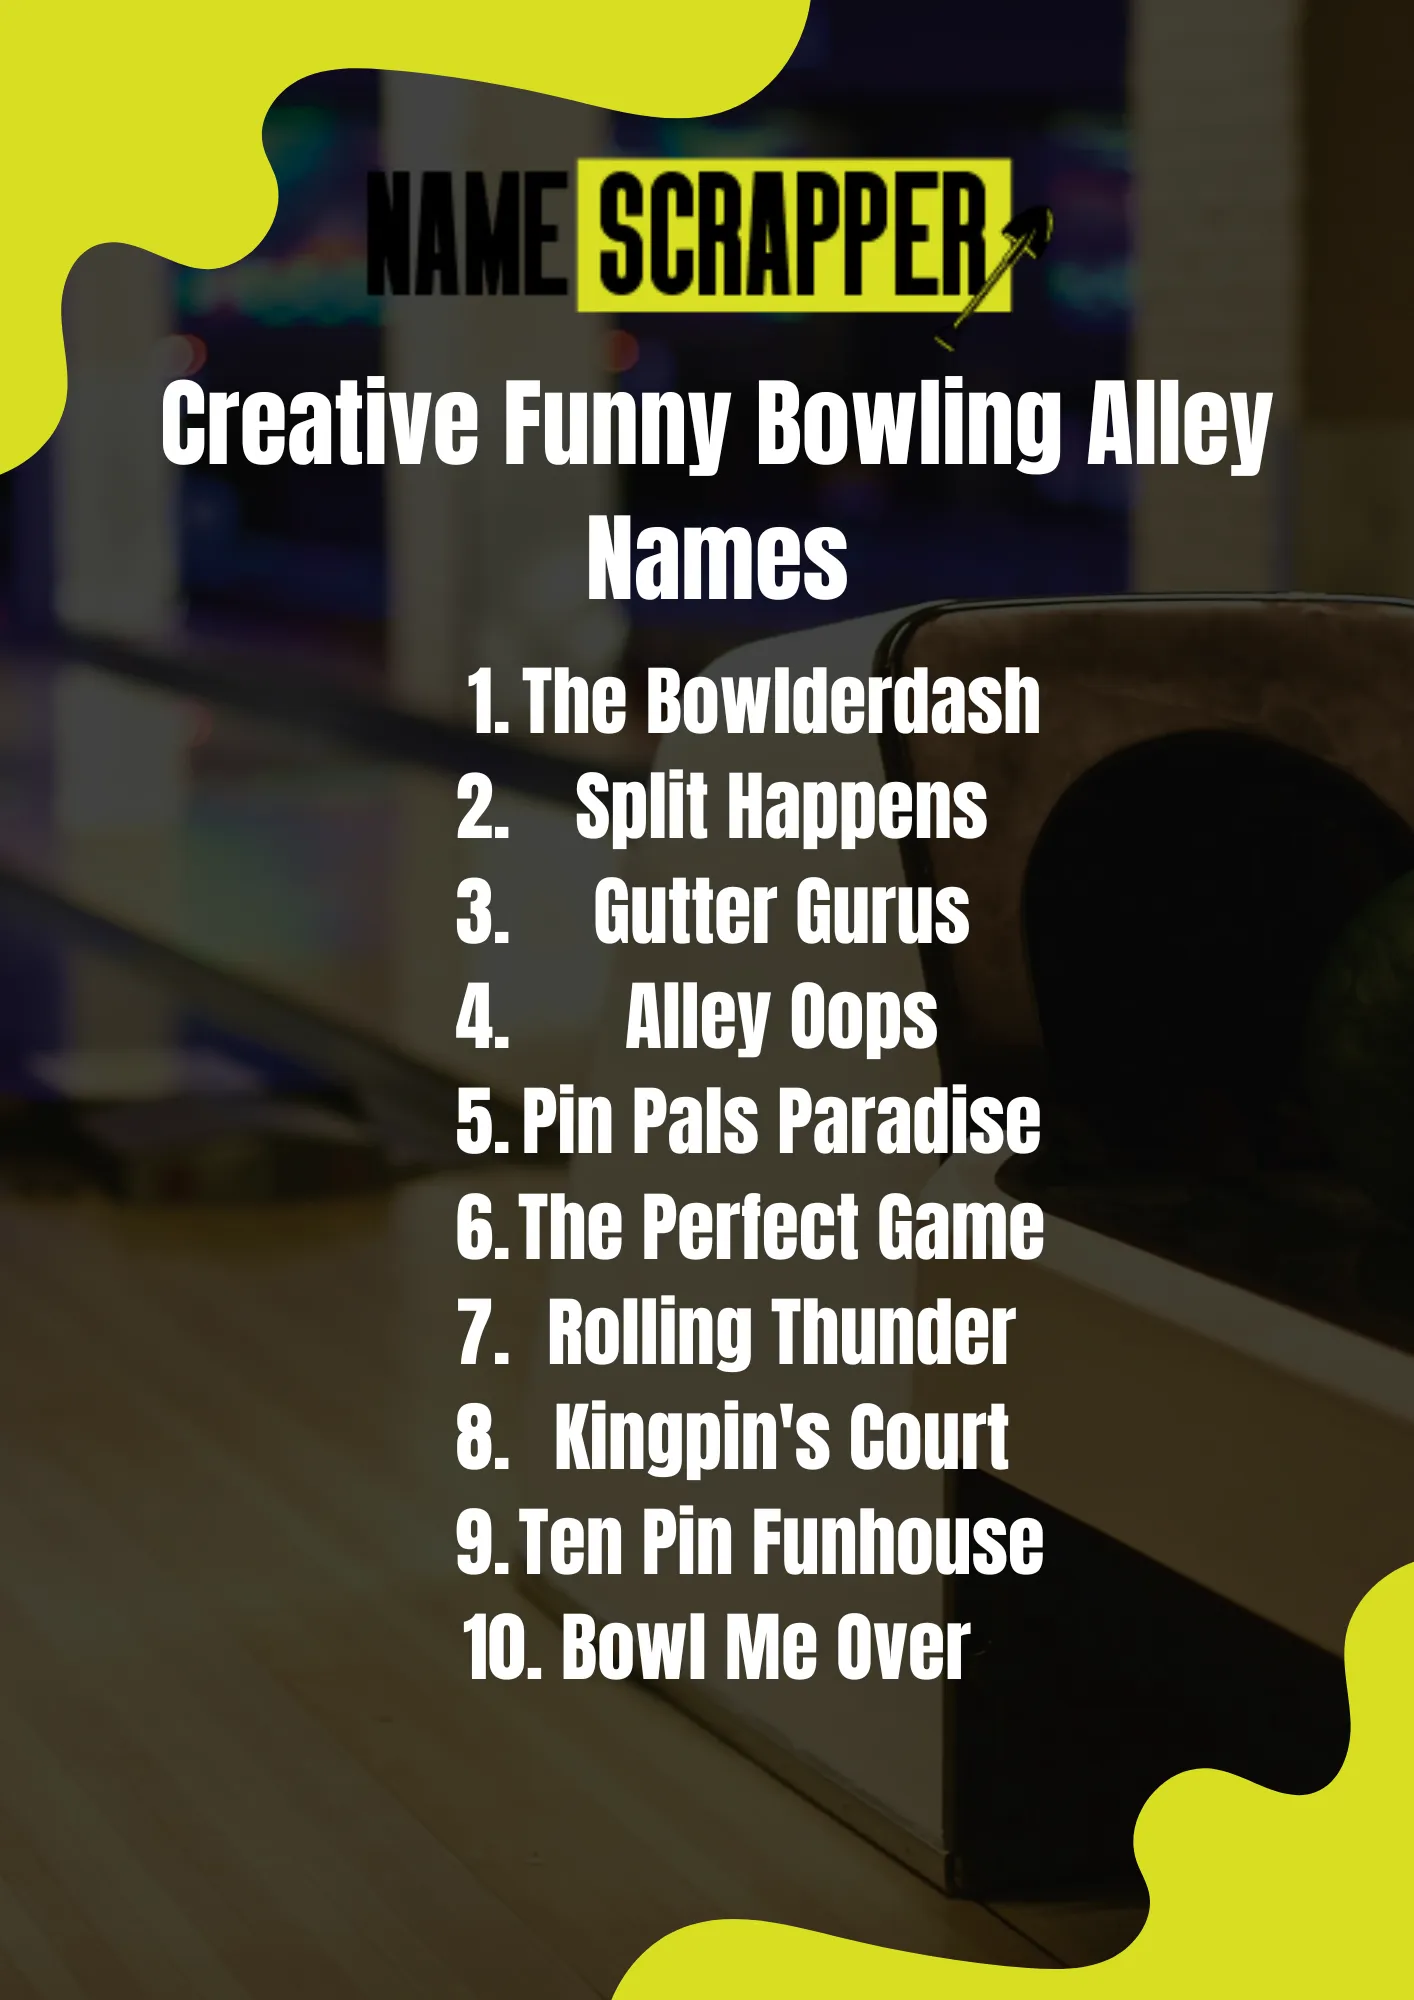 Creative Funny Bowling Alley Names